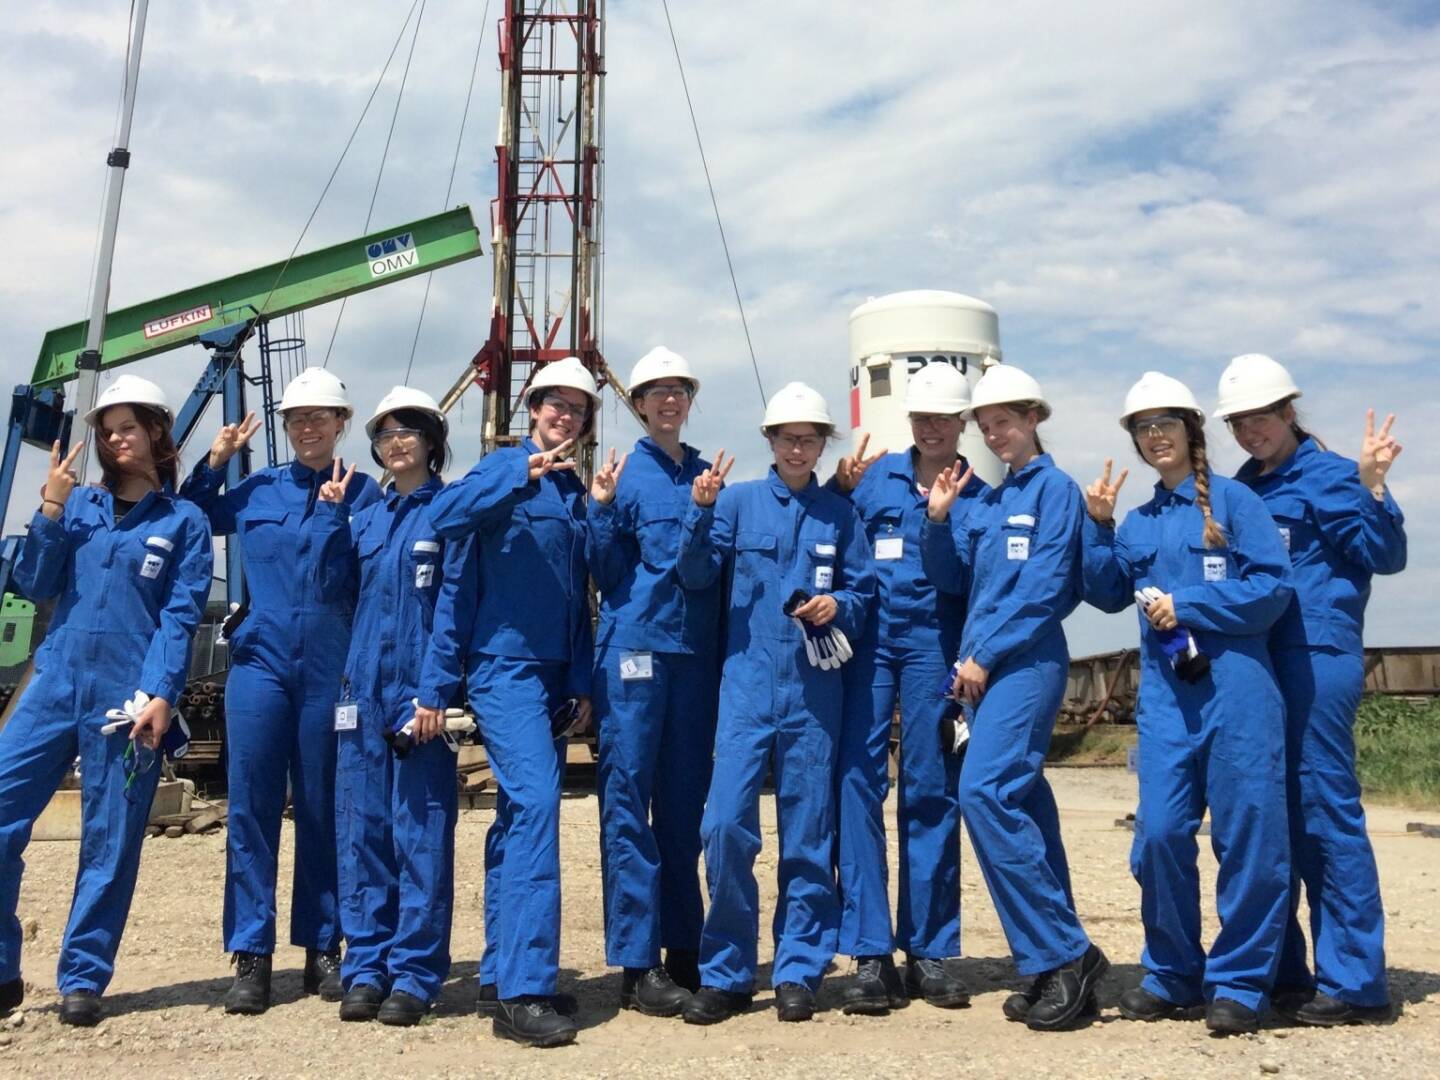 OMV It was a pleasure to have 10 Technikqueens as our guests at a production well of OMV Austria earlier this week. We hope the visit could strengthen their interest in succeeding a technical career.